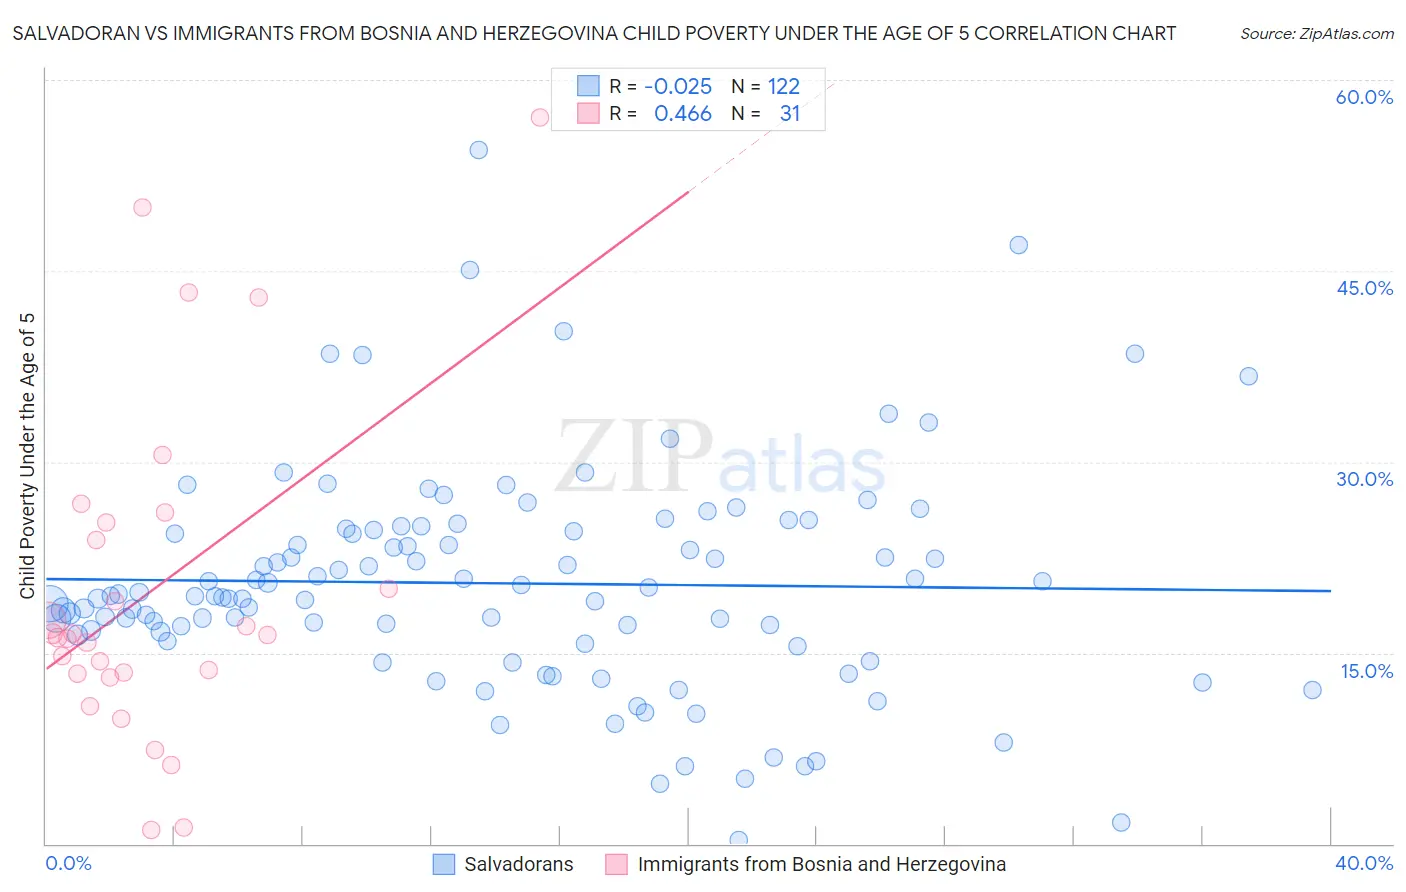 Salvadoran vs Immigrants from Bosnia and Herzegovina Child Poverty Under the Age of 5